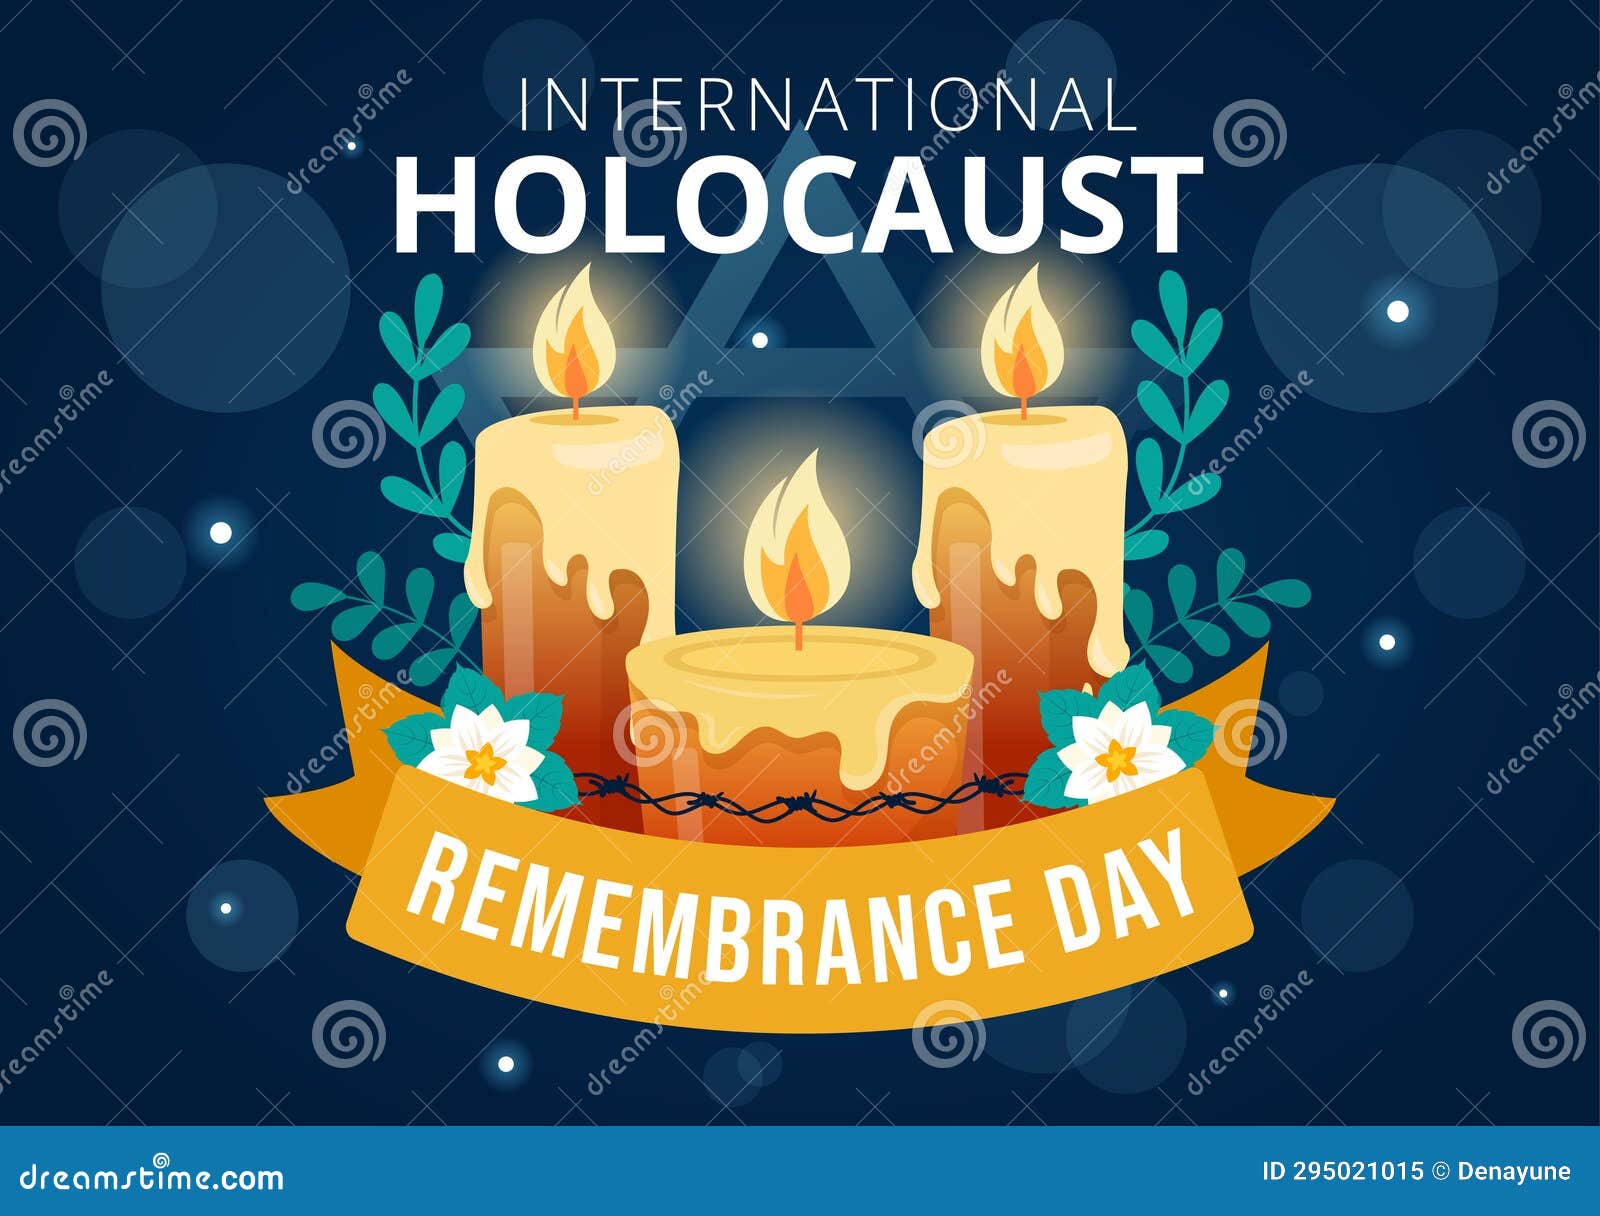 international holocaust remembrance day   on 27 january with yellow star and candle to commemorates the victims